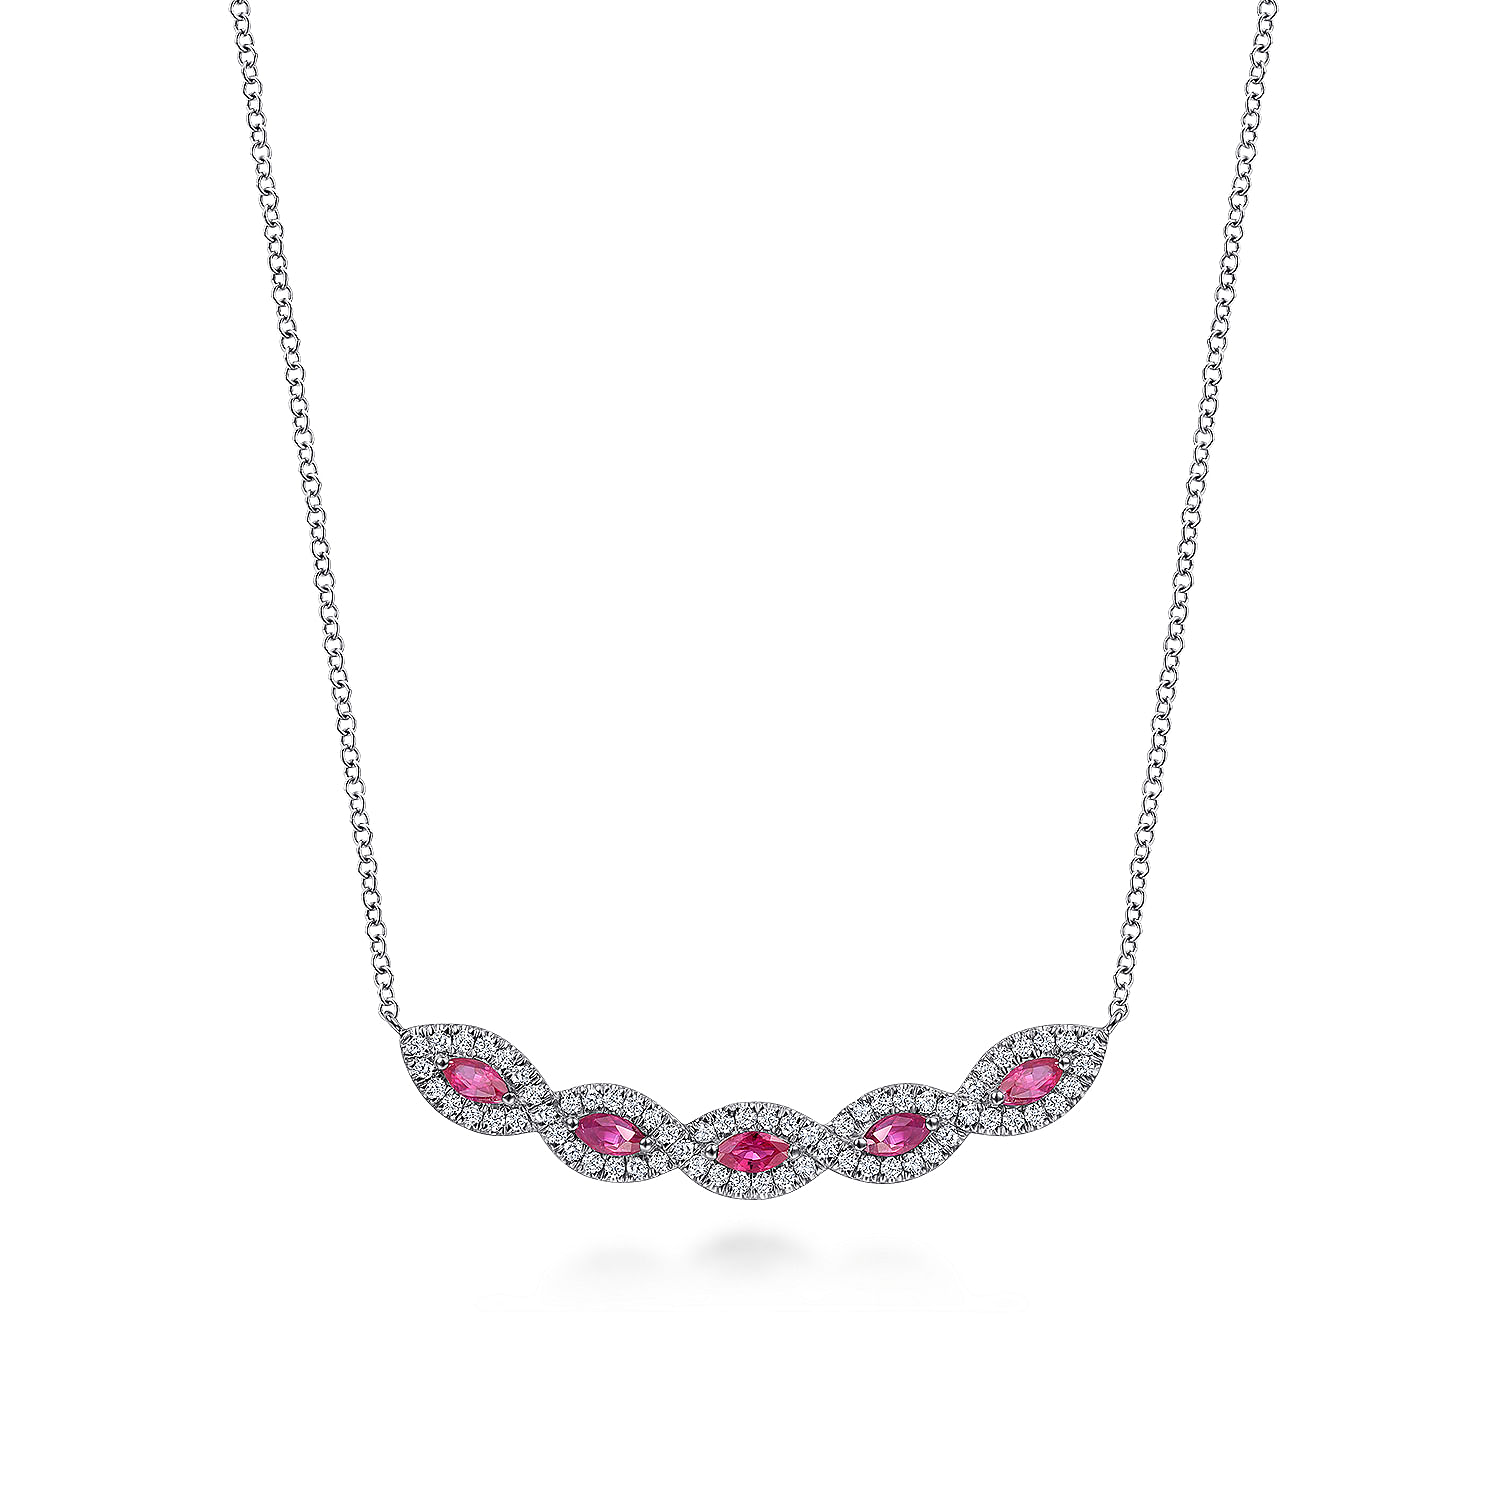 Gabriel - 14K White Gold Diamond and Ruby Necklace